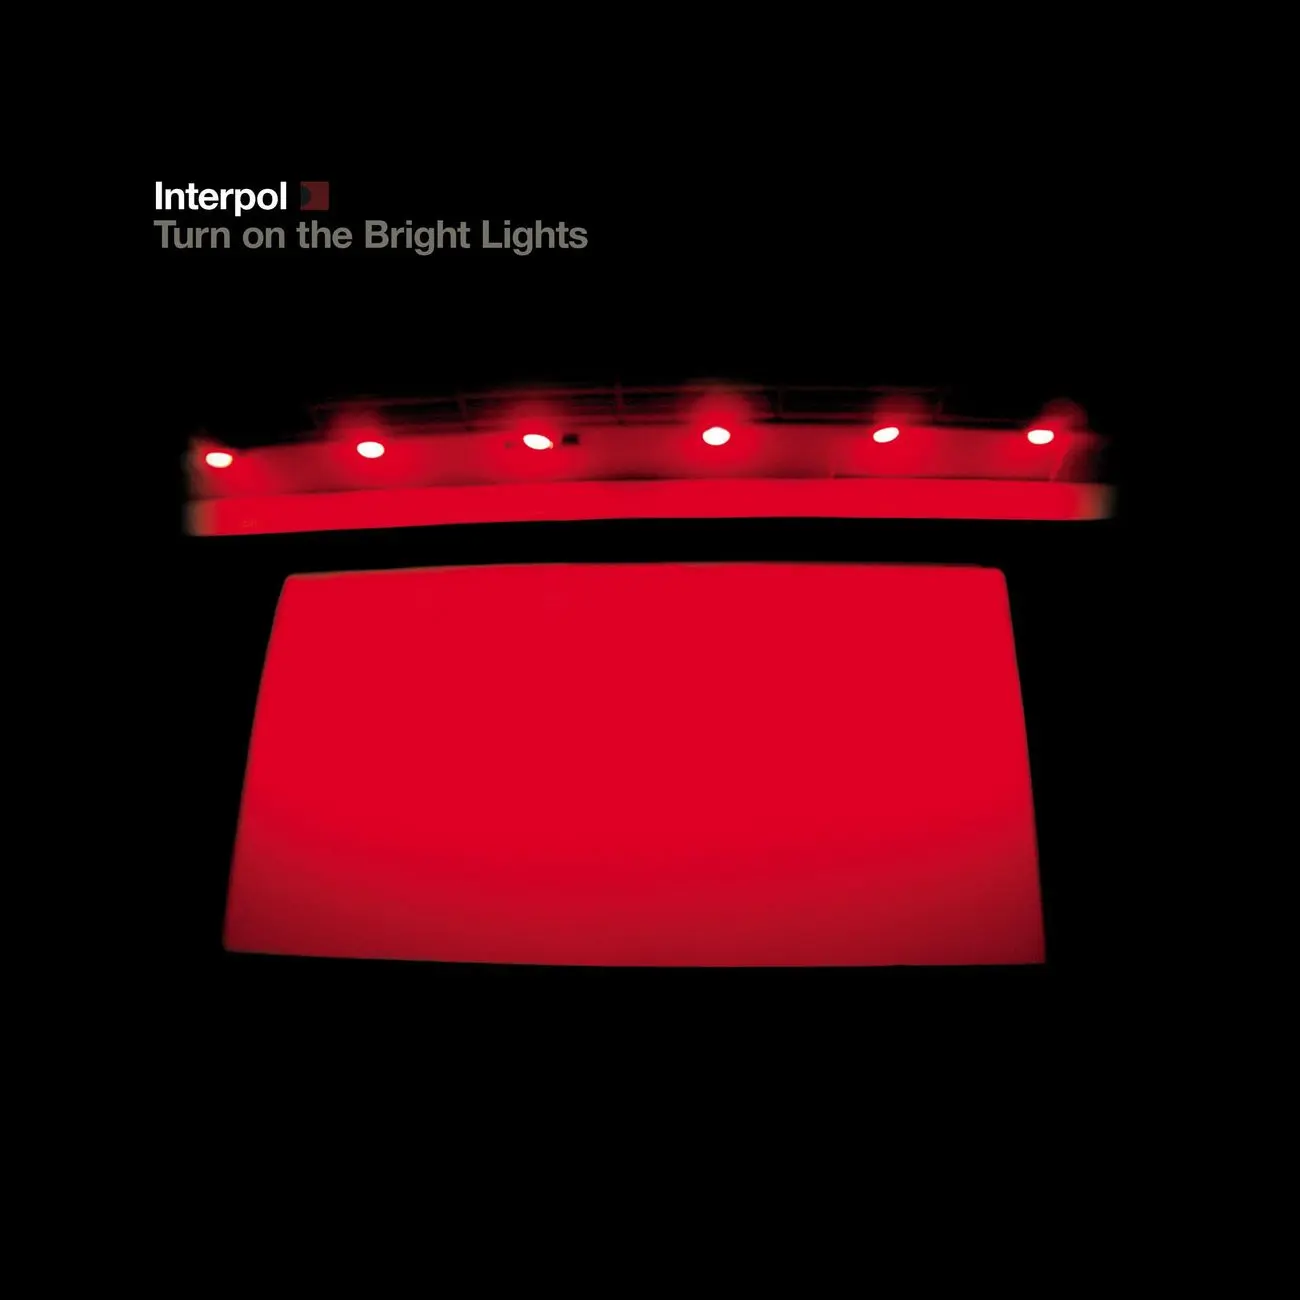 Turn On the Bright Lights by Interpol